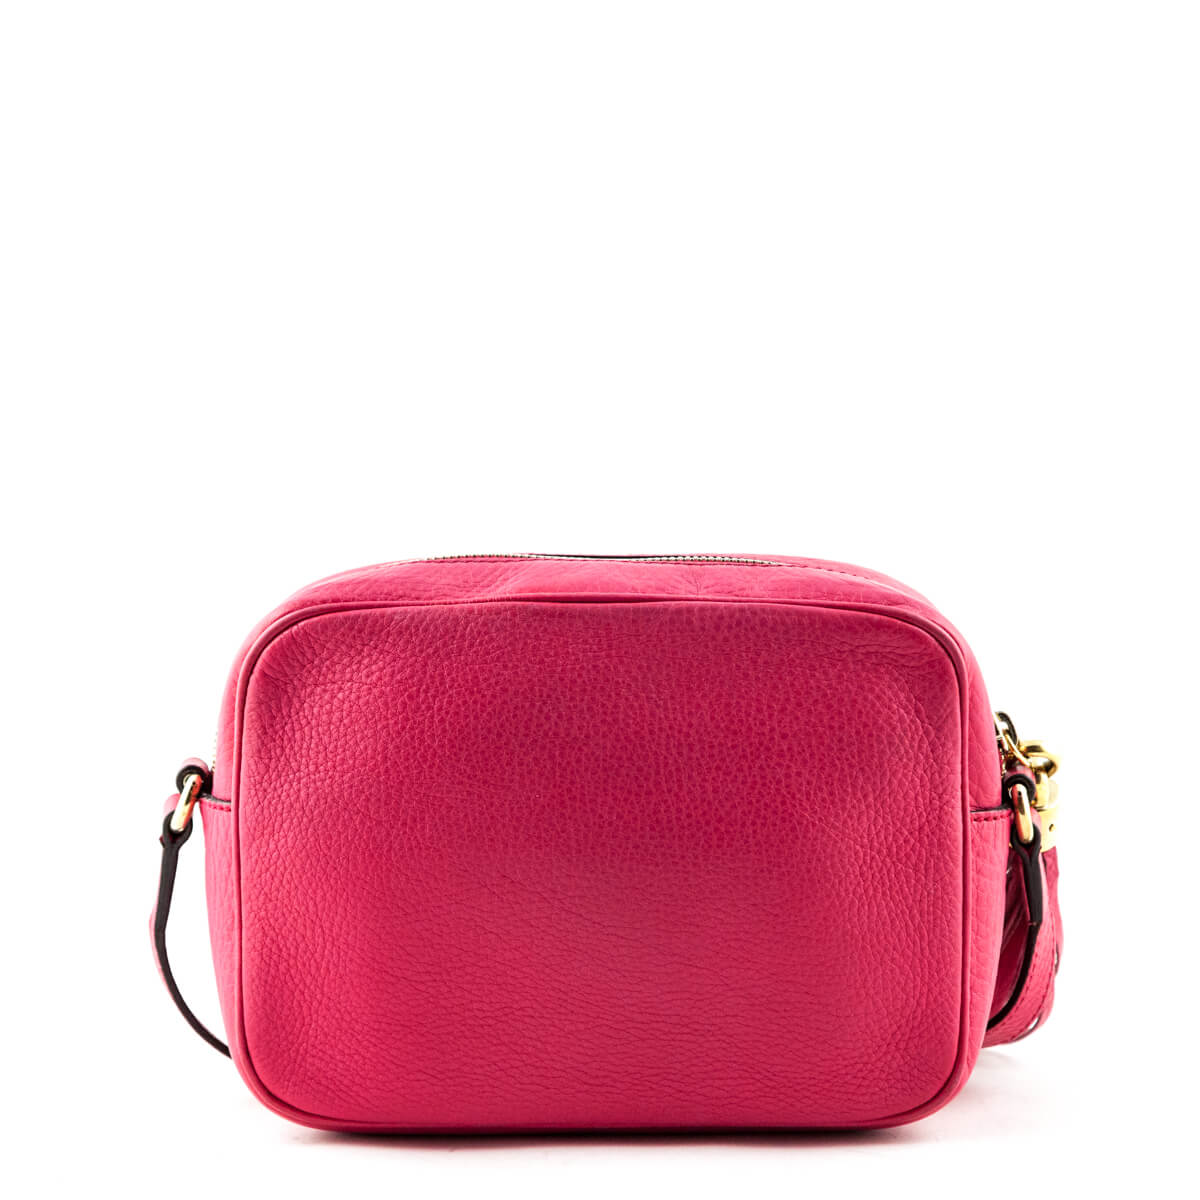 Gucci Hot Pink Soho Disco - Authentic Luxury Bags Canada